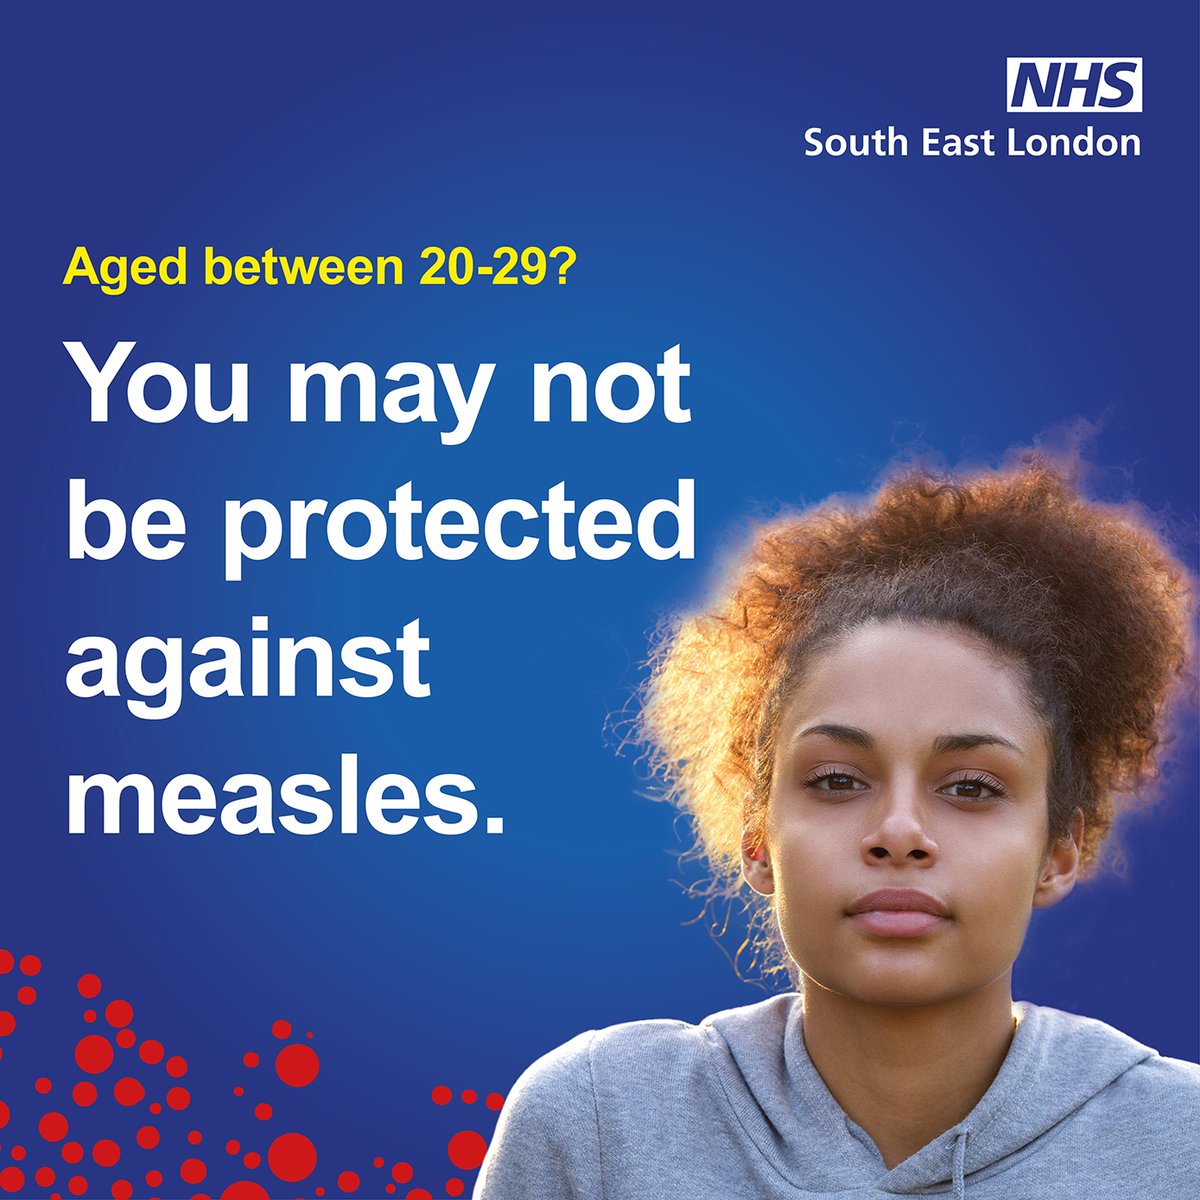 Measles cases are rising in Lambeth. If you're a young adult and haven't had the MMR vaccine, you could be at risk. Get protected. Contact your GP. More info: nhs.uk/nhs-services/g…